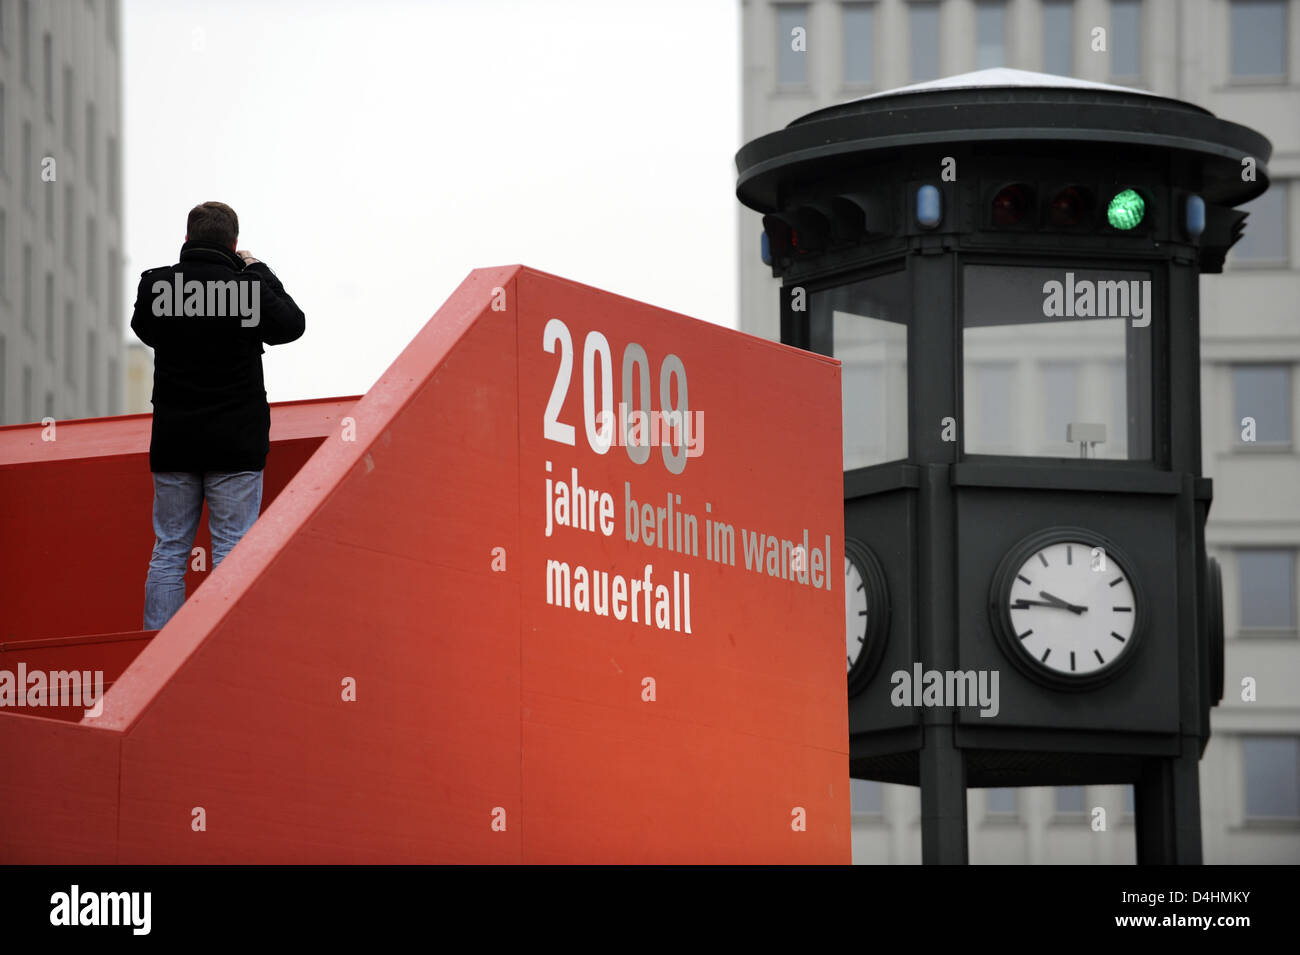 A man stands on a red, mobile viewing platform errected within the scope of the 20th anniversary celebrations of the fall of the wall (?20 Jahre Mauerfall - Berlin im Wandel?) on Potsdam Square in Berlin, Germany, 29 January 2009. Underneath the platform a small exhibition displays photos and other information about the locations in their various states before and after the fall of Stock Photo